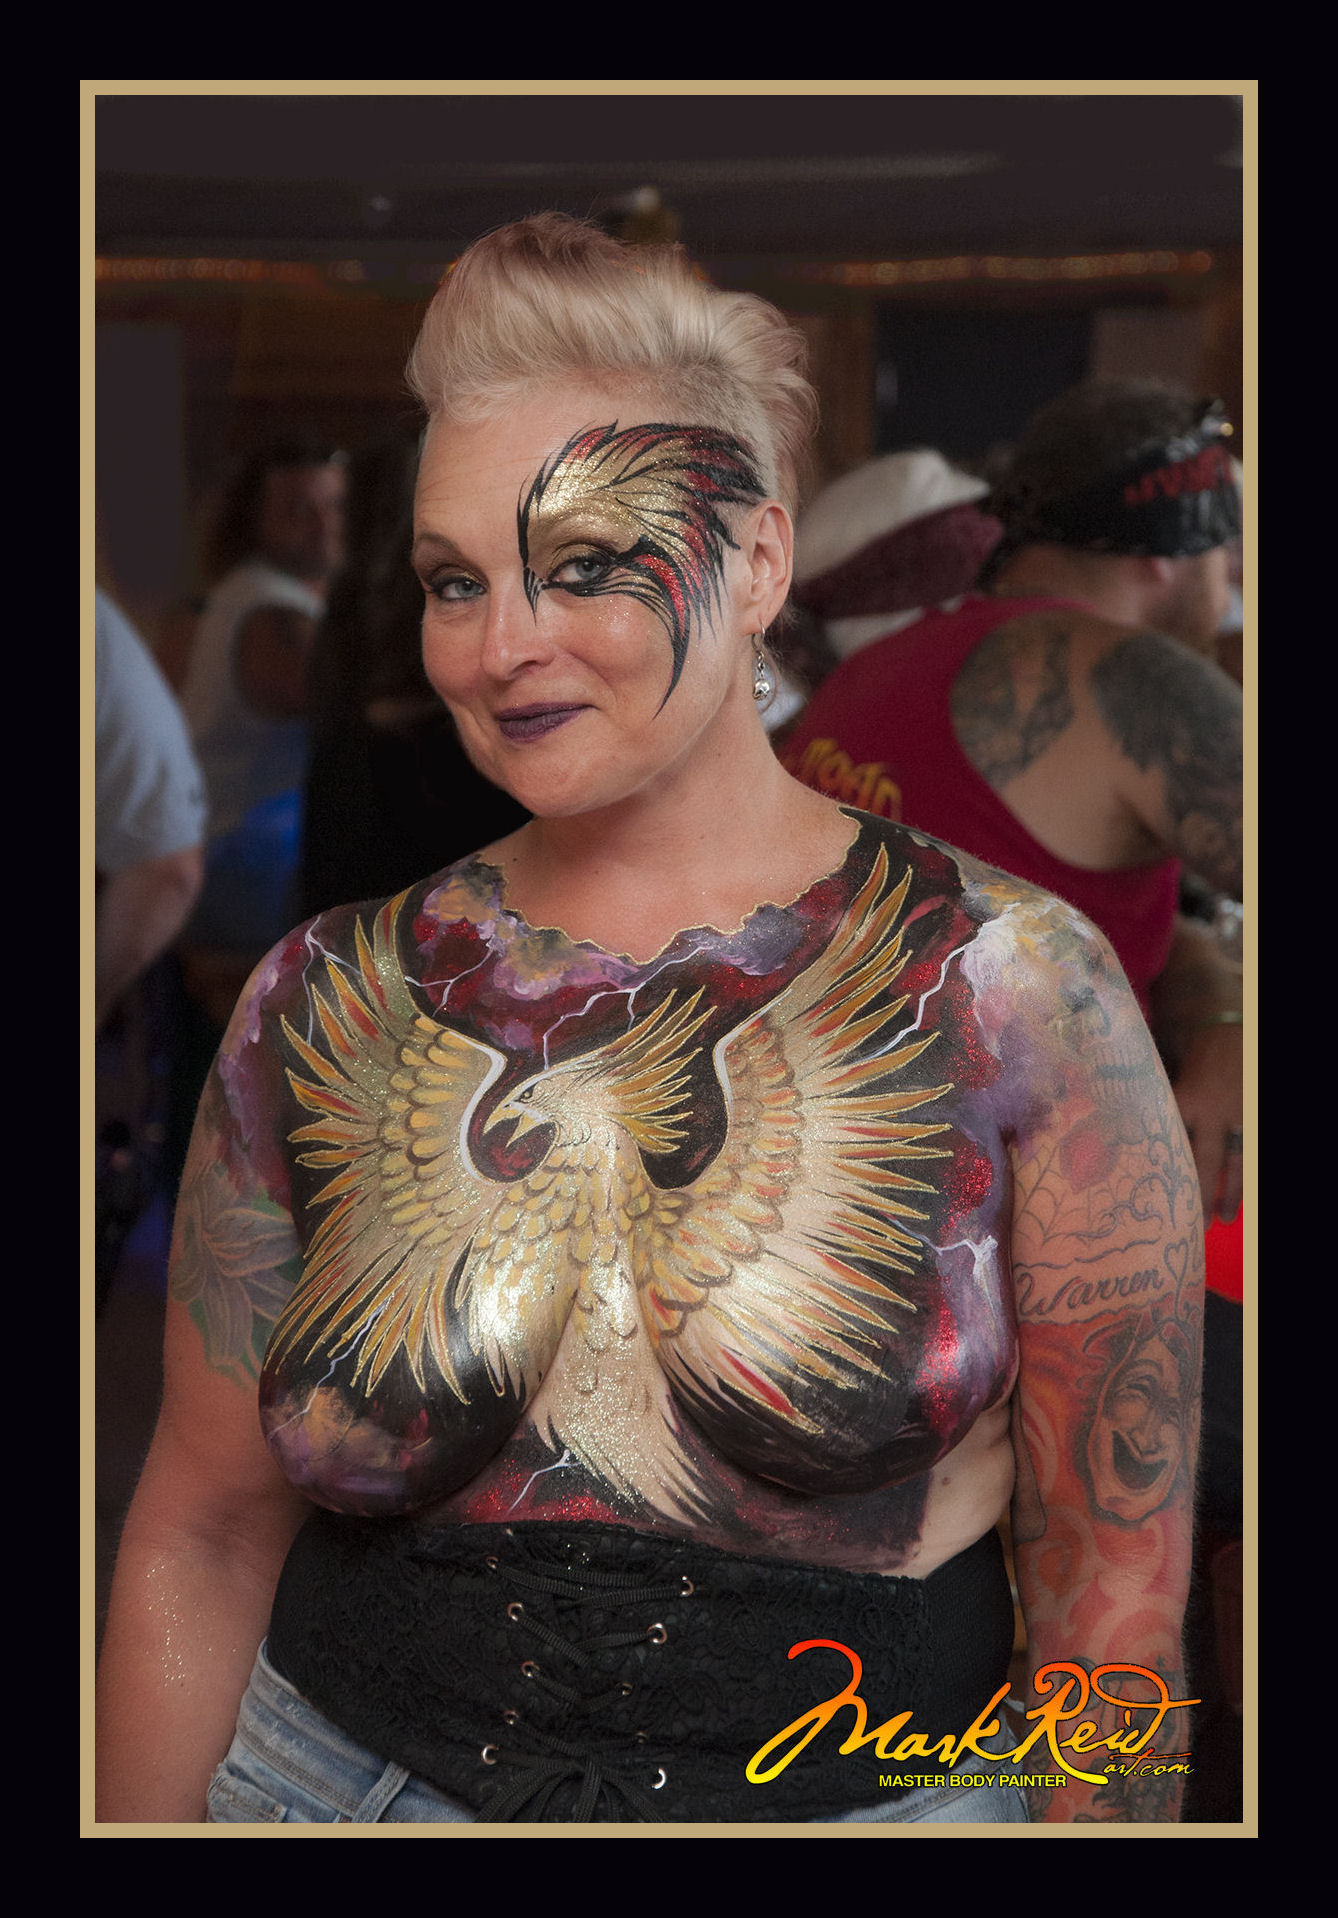 blonde model with an extremely detailed body painting featuring a metalic gold phoenix